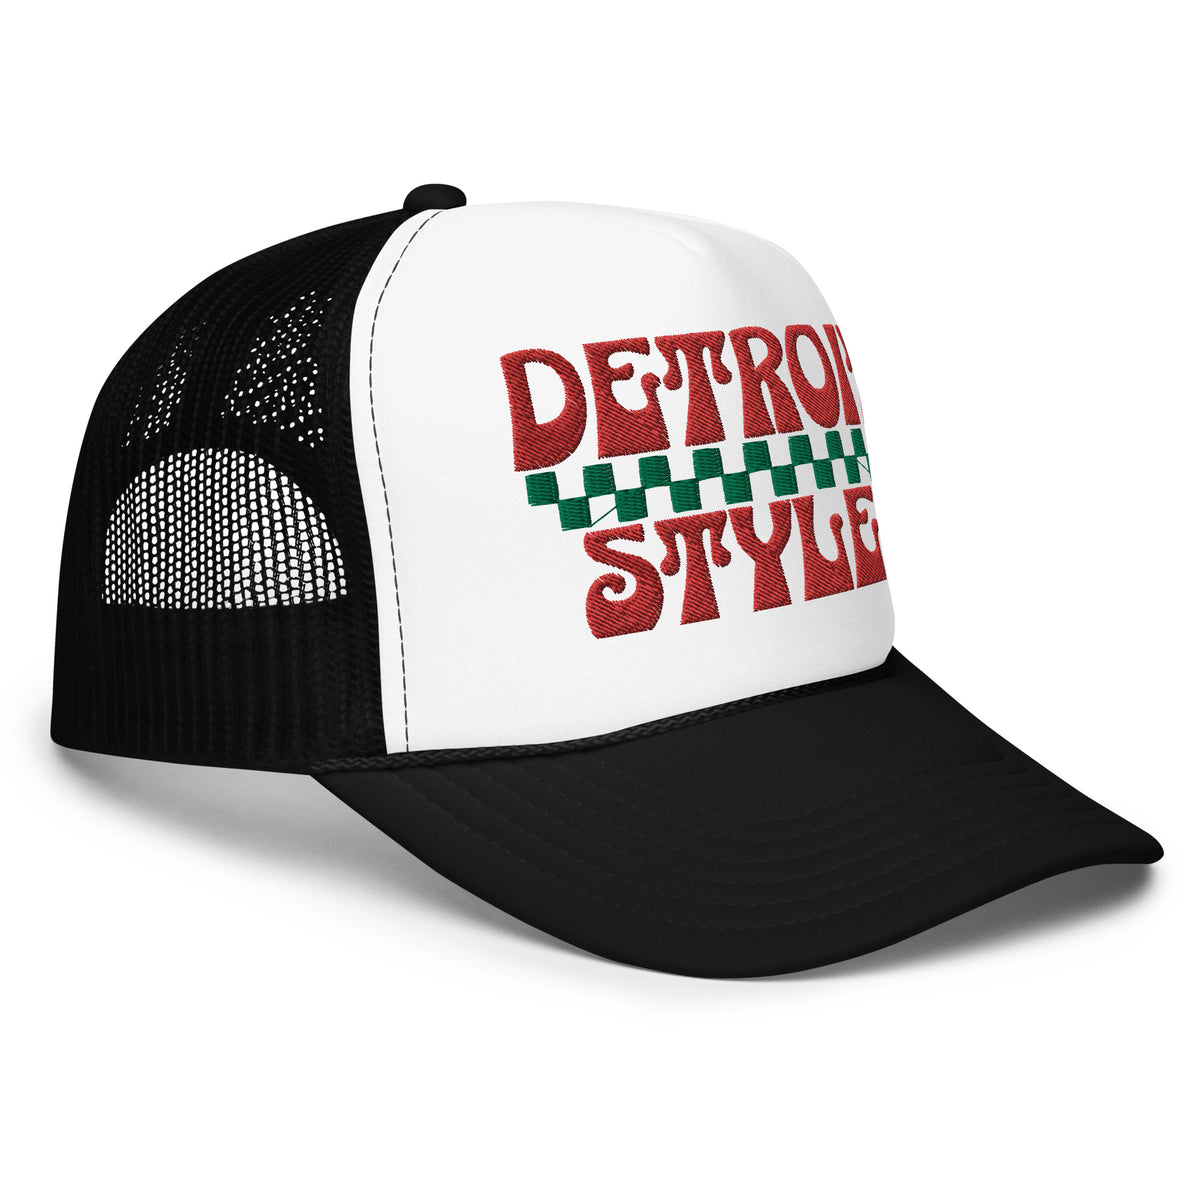 Detroit Style Foam Trucker Hat - Black & White - Embroidered with Red & Green Hat   